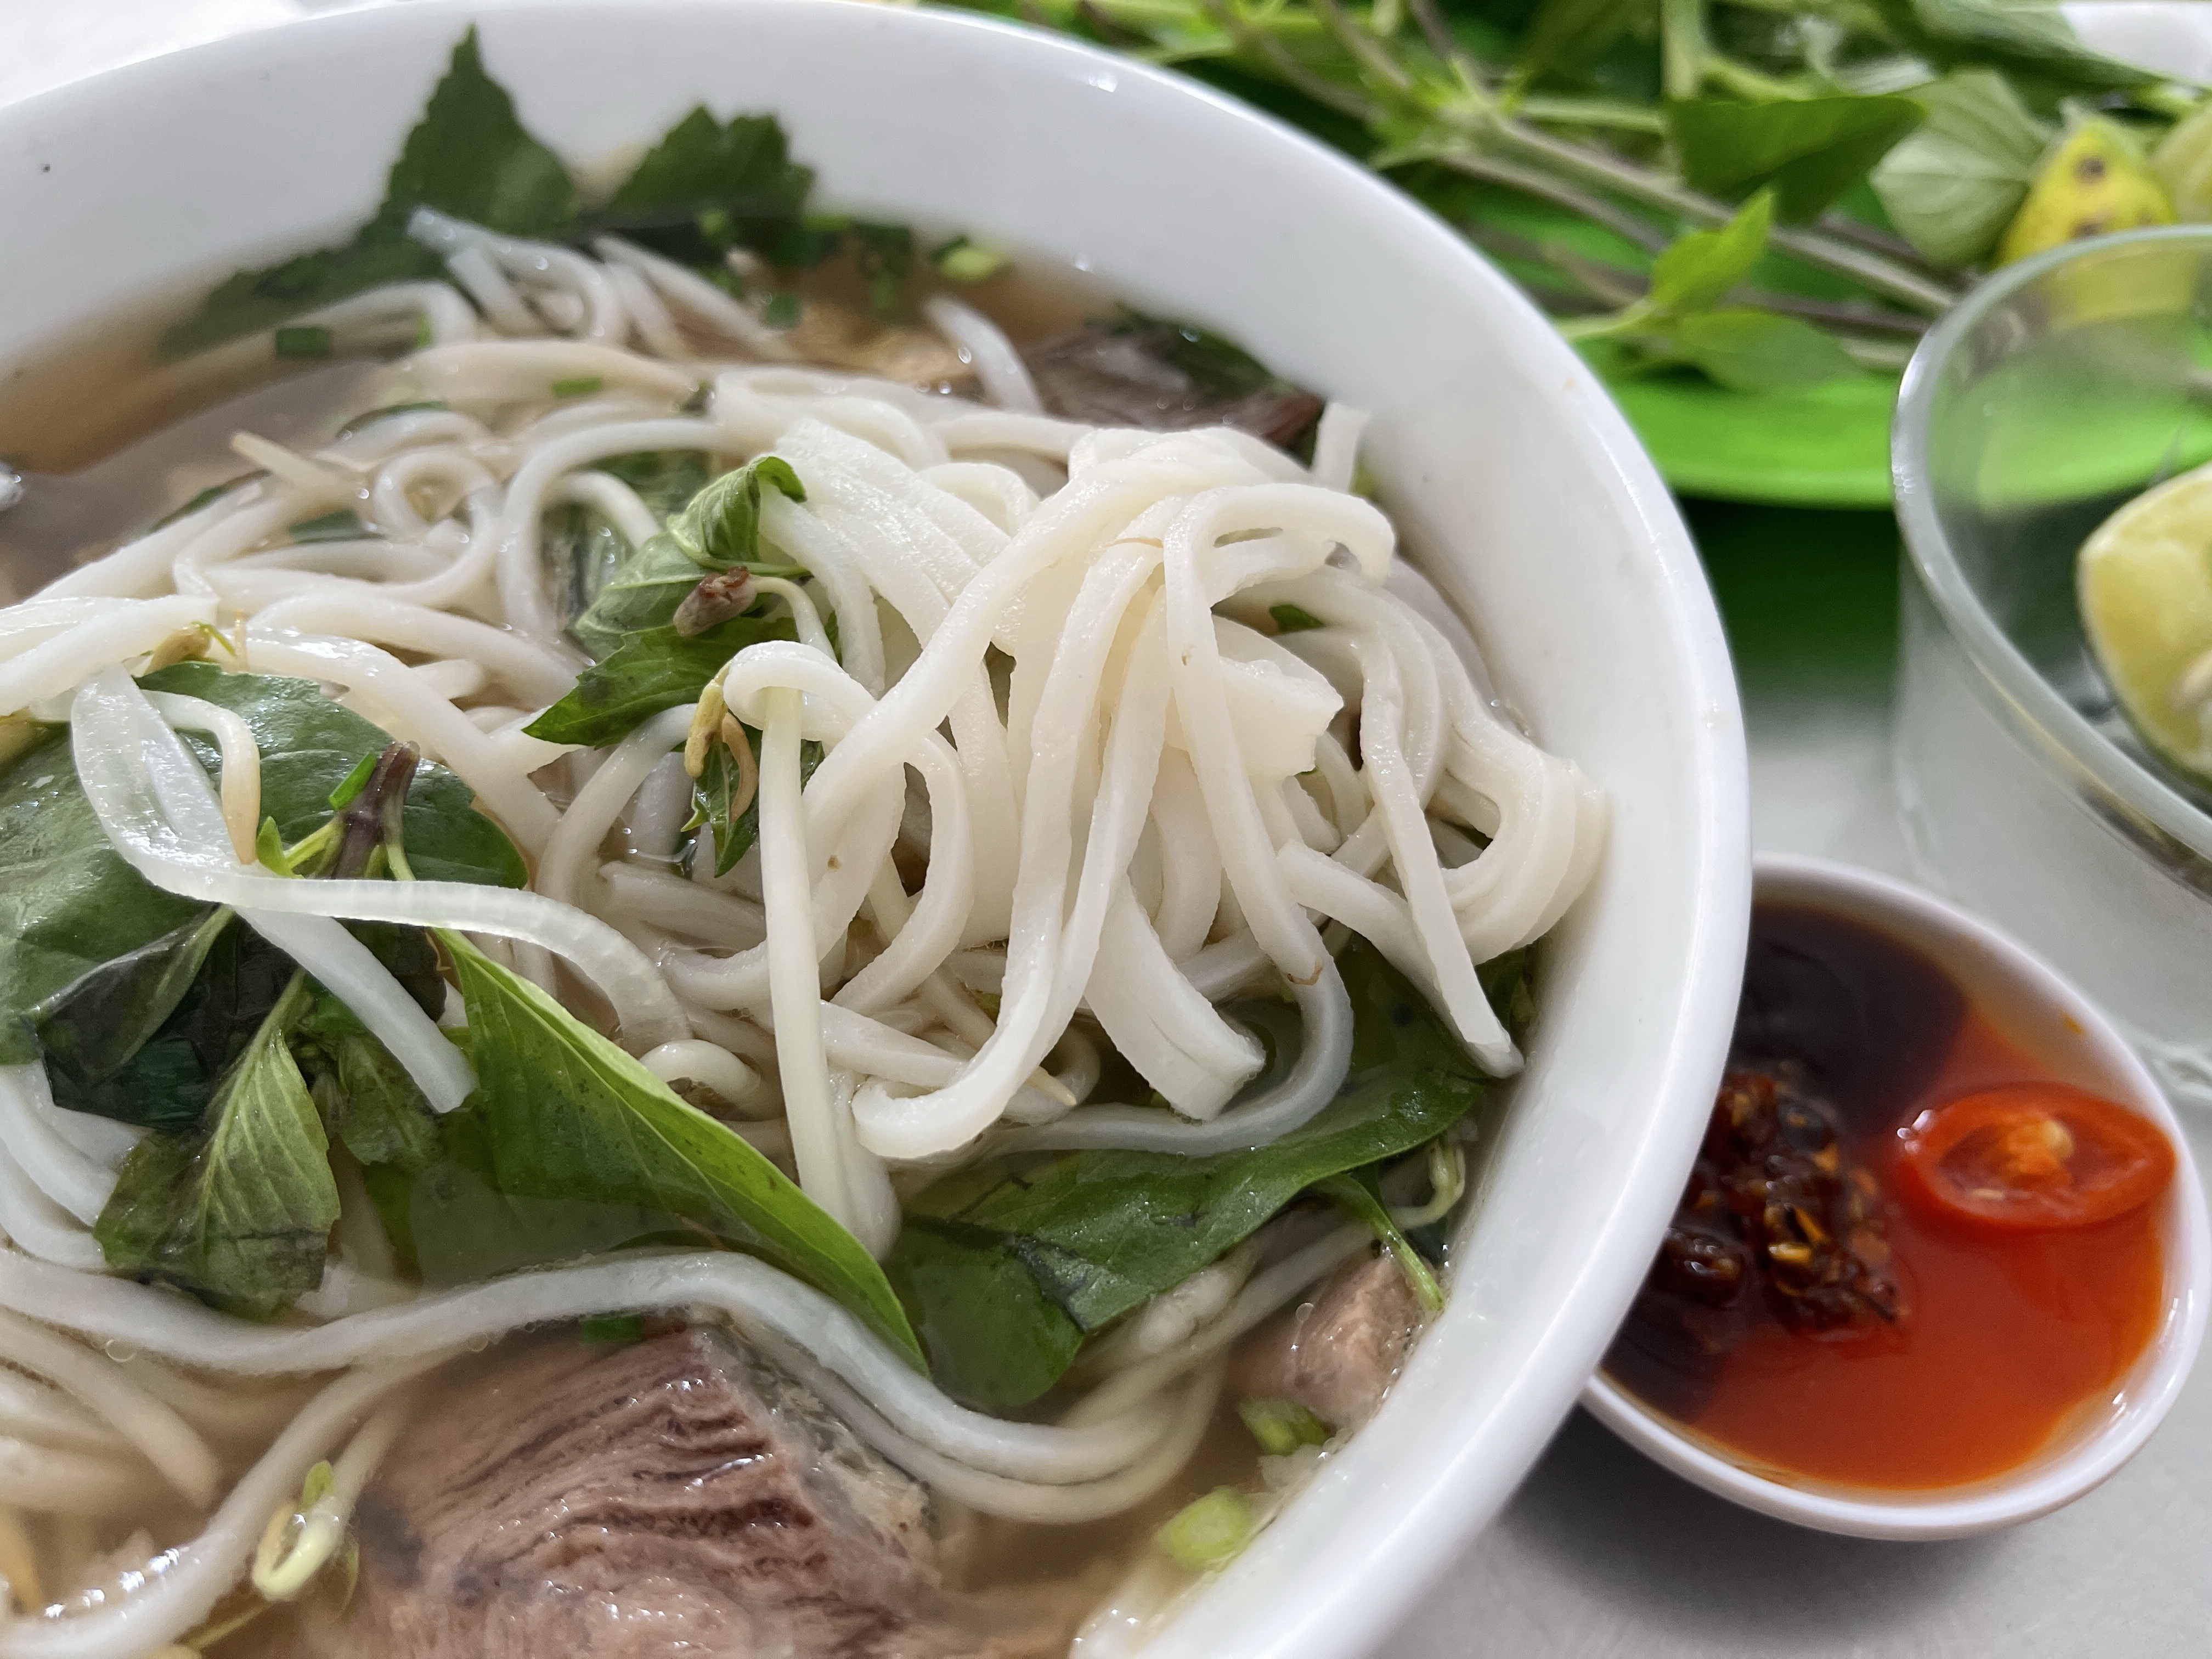 A close-up shot shows the square-shape noodles used in southern-style pho, which are different from the flat noodles used in northern-style pho. Photo: Dong Nguyen / Tuoi Tre News